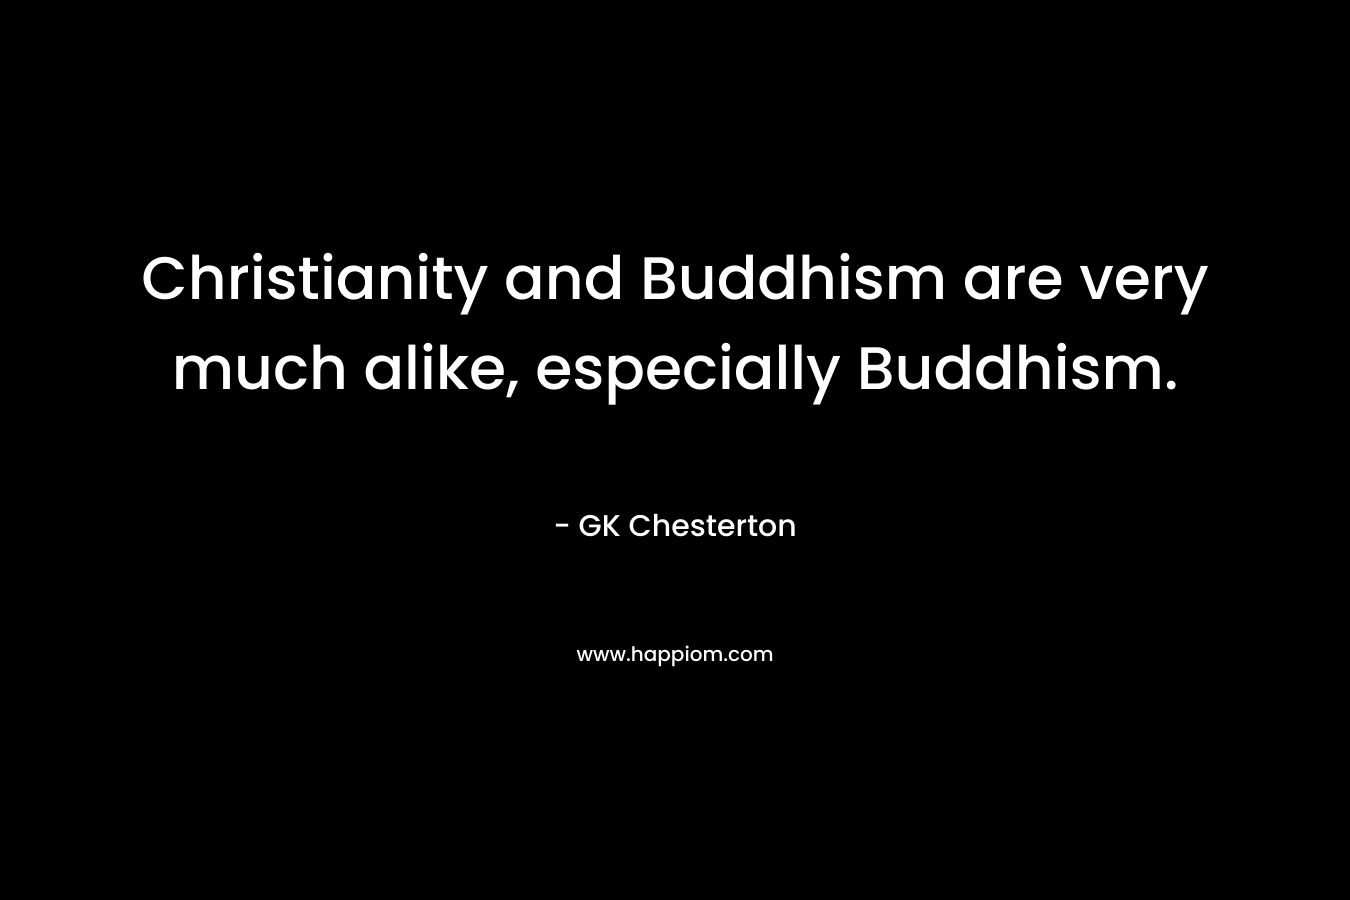 Christianity and Buddhism are very much alike, especially Buddhism. – GK Chesterton